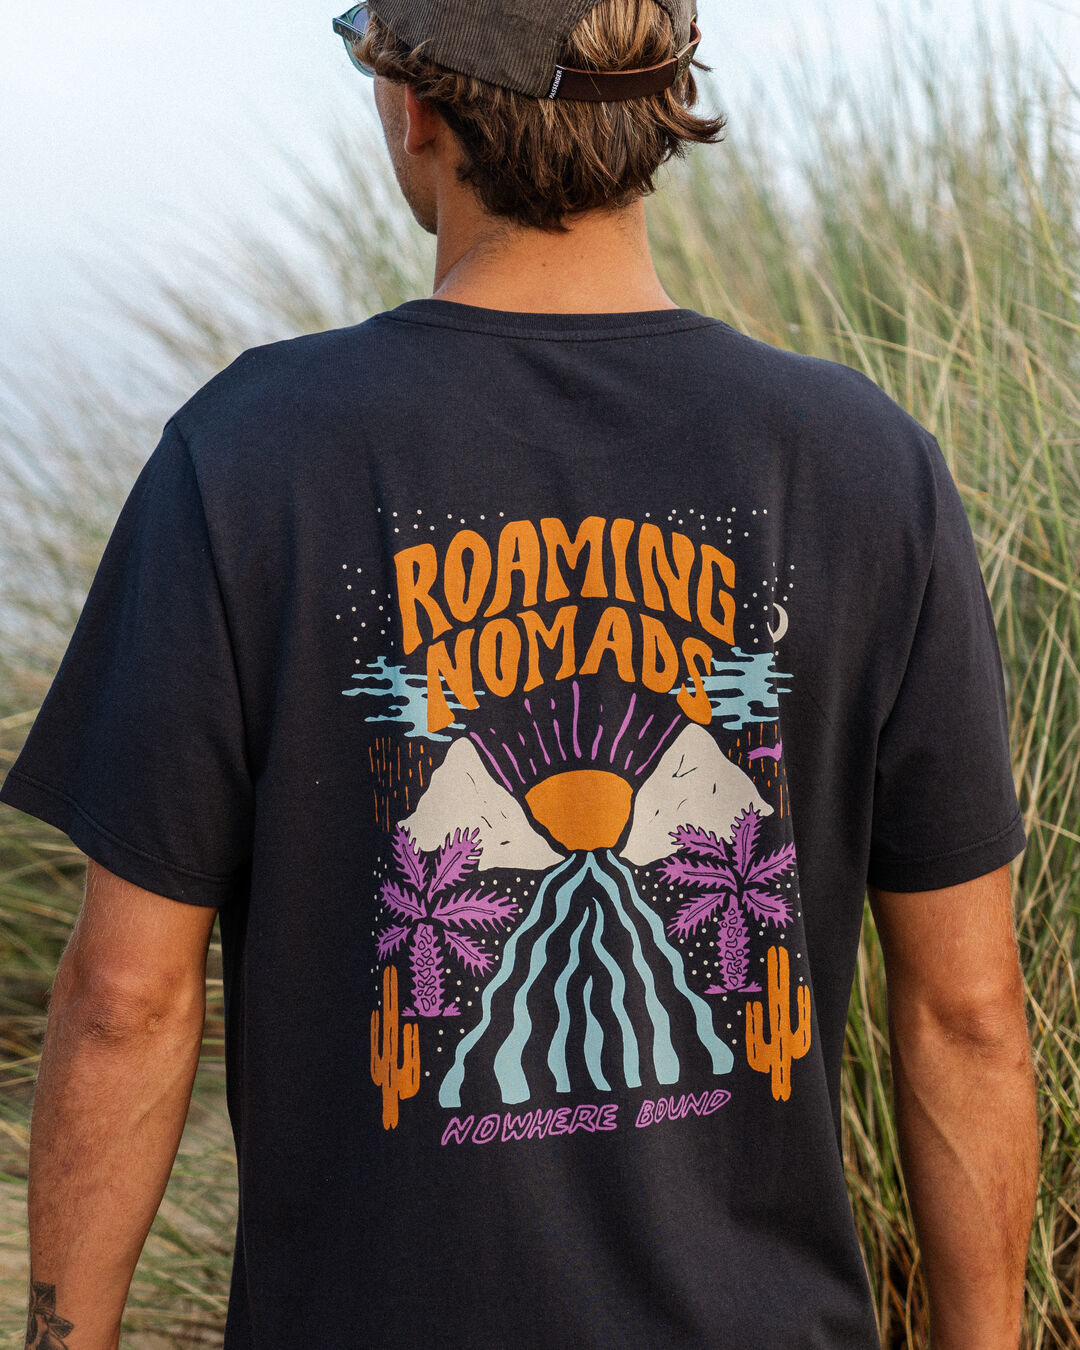 Roaming Nomads Recycled Cotton T-Shirt - Black